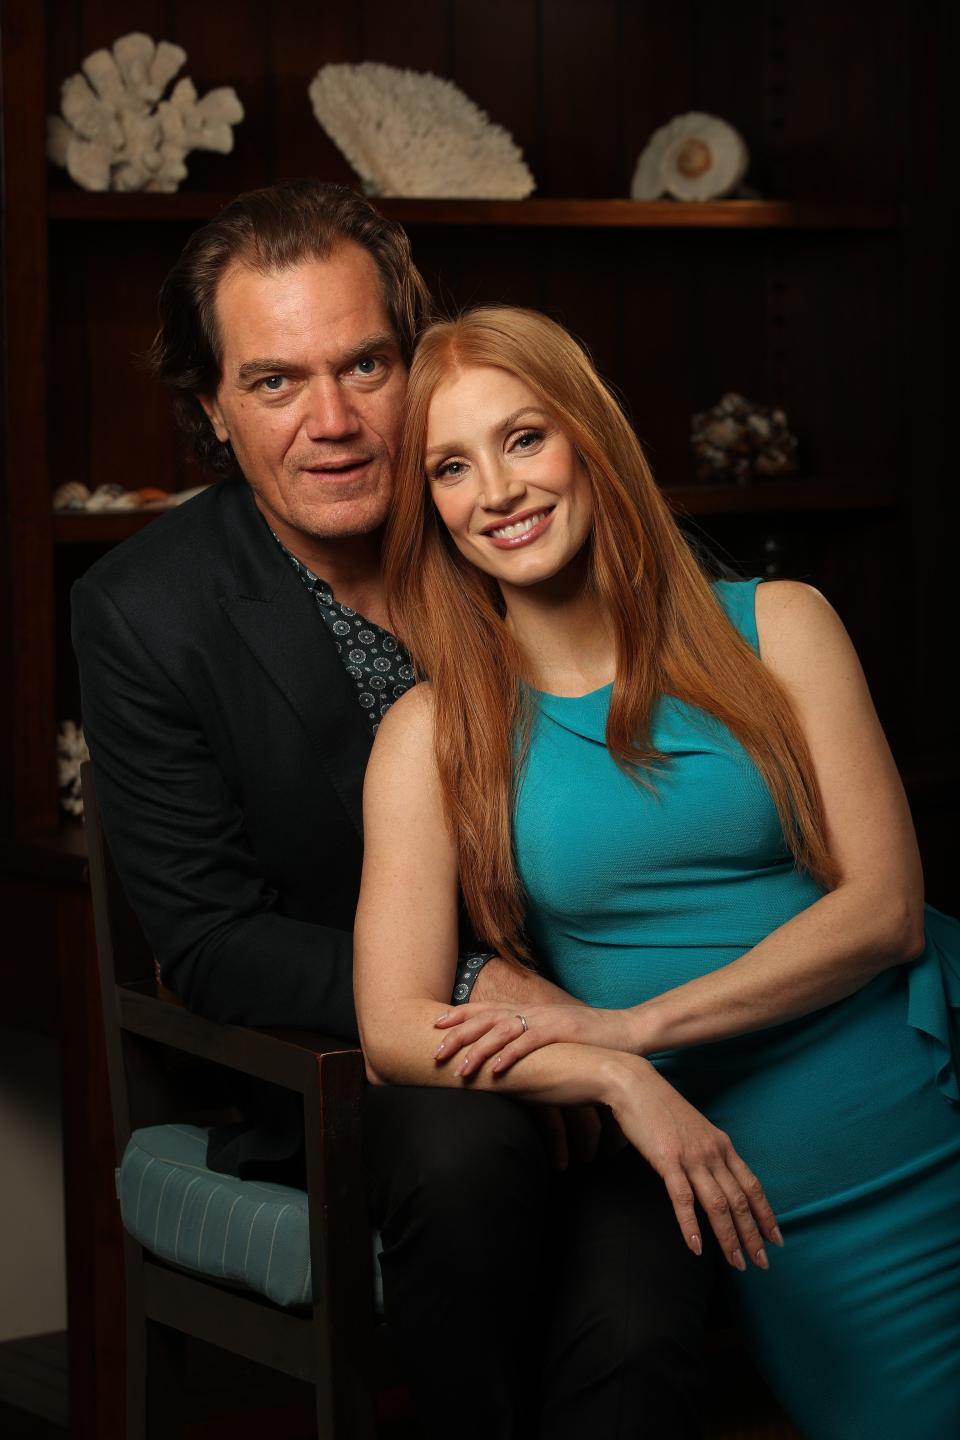 Jessica Chastain and Michael Shannon star in “George &amp; Tammy” a limited series about Tammy Wynette and George Jones.